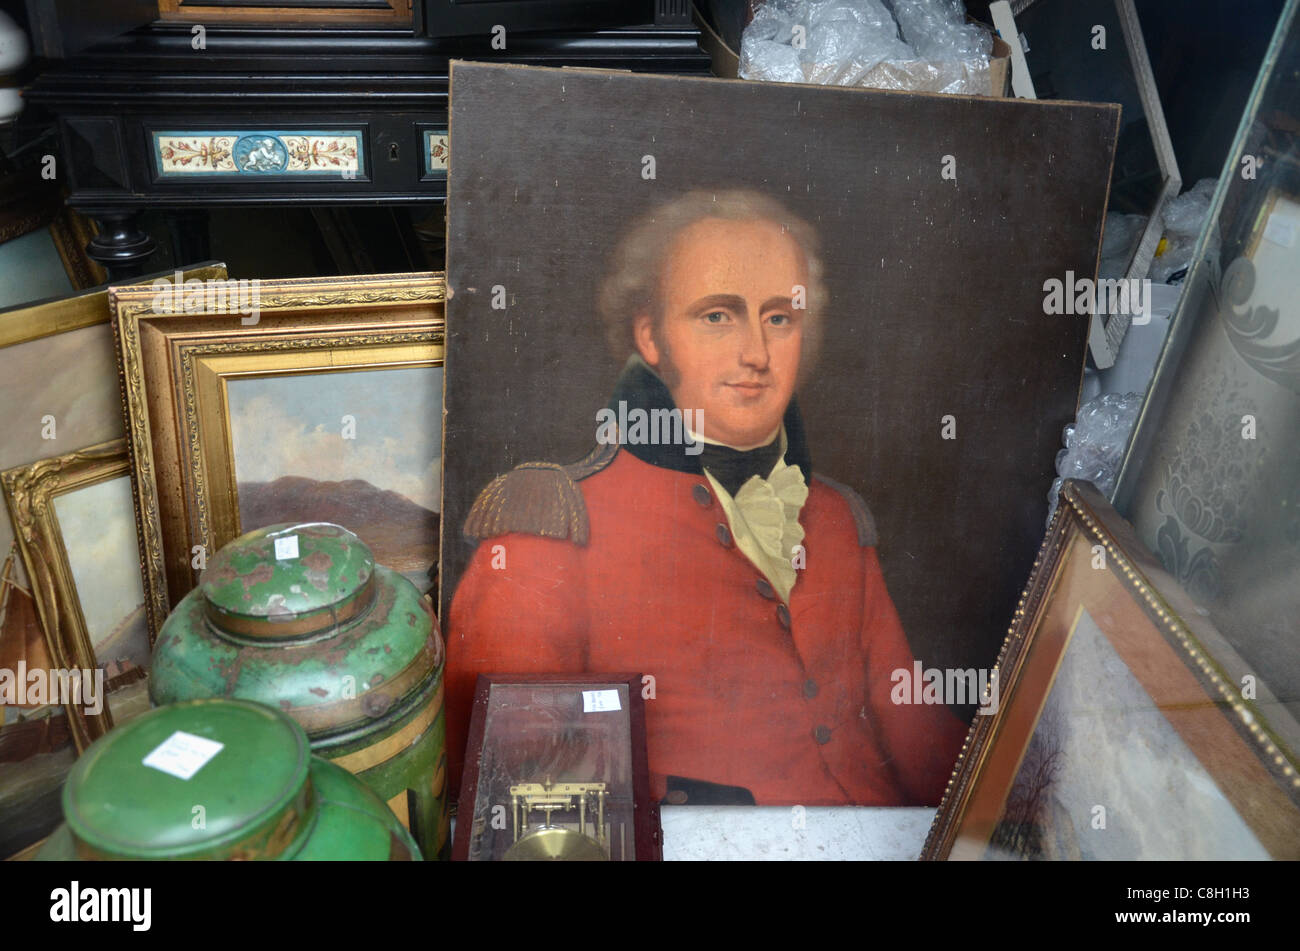 Paintings and bric-a-brac in the window of a junk shop in Edinburgh's New Town. Stock Photo